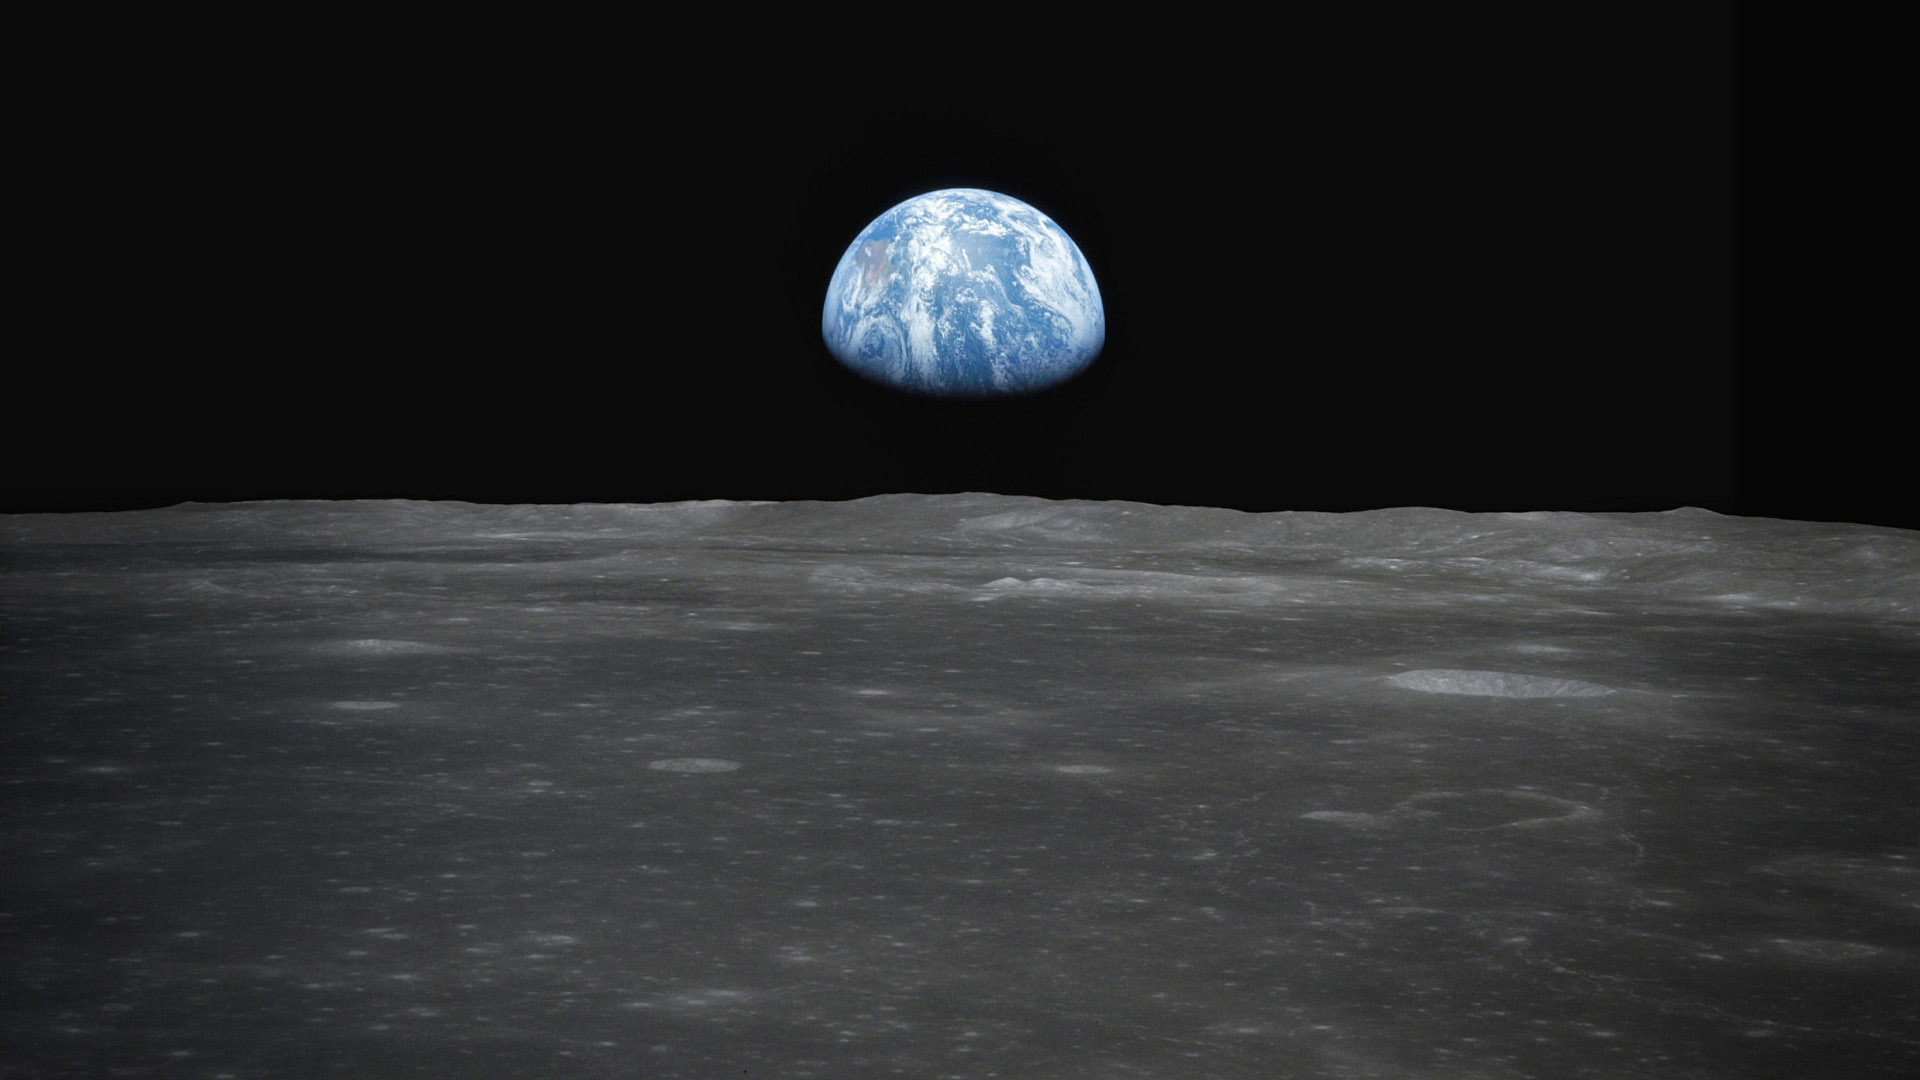 Earthrise above the surface of the Moon